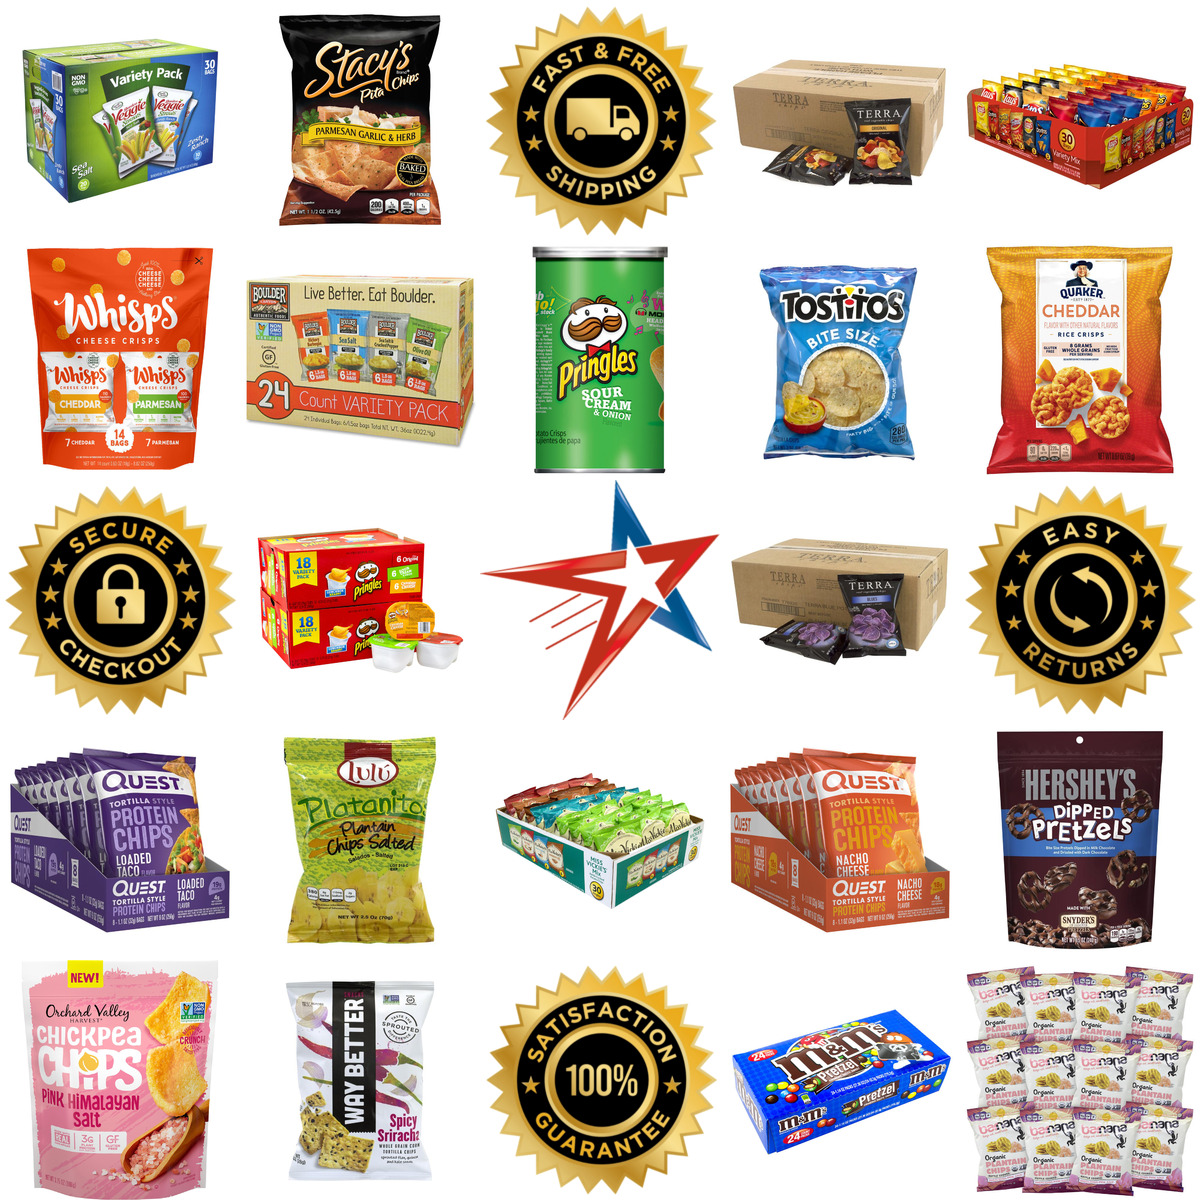 A selection of Chips and Pretzels products on GoVets